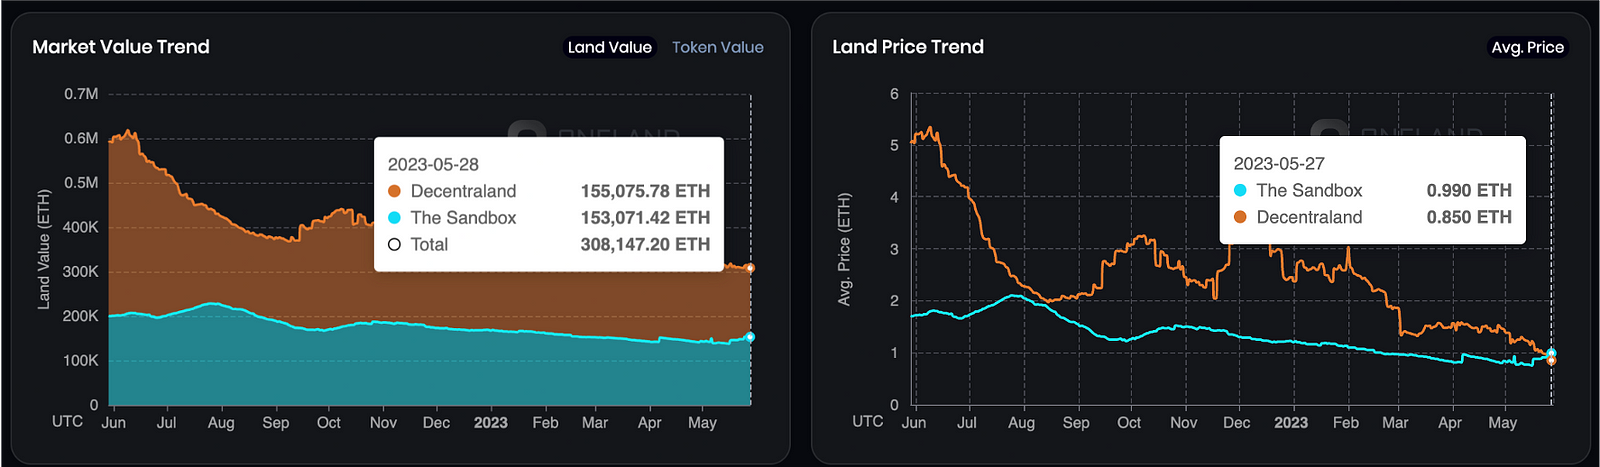 Land caps and average prices in The Sandbox and Decentraland are converging